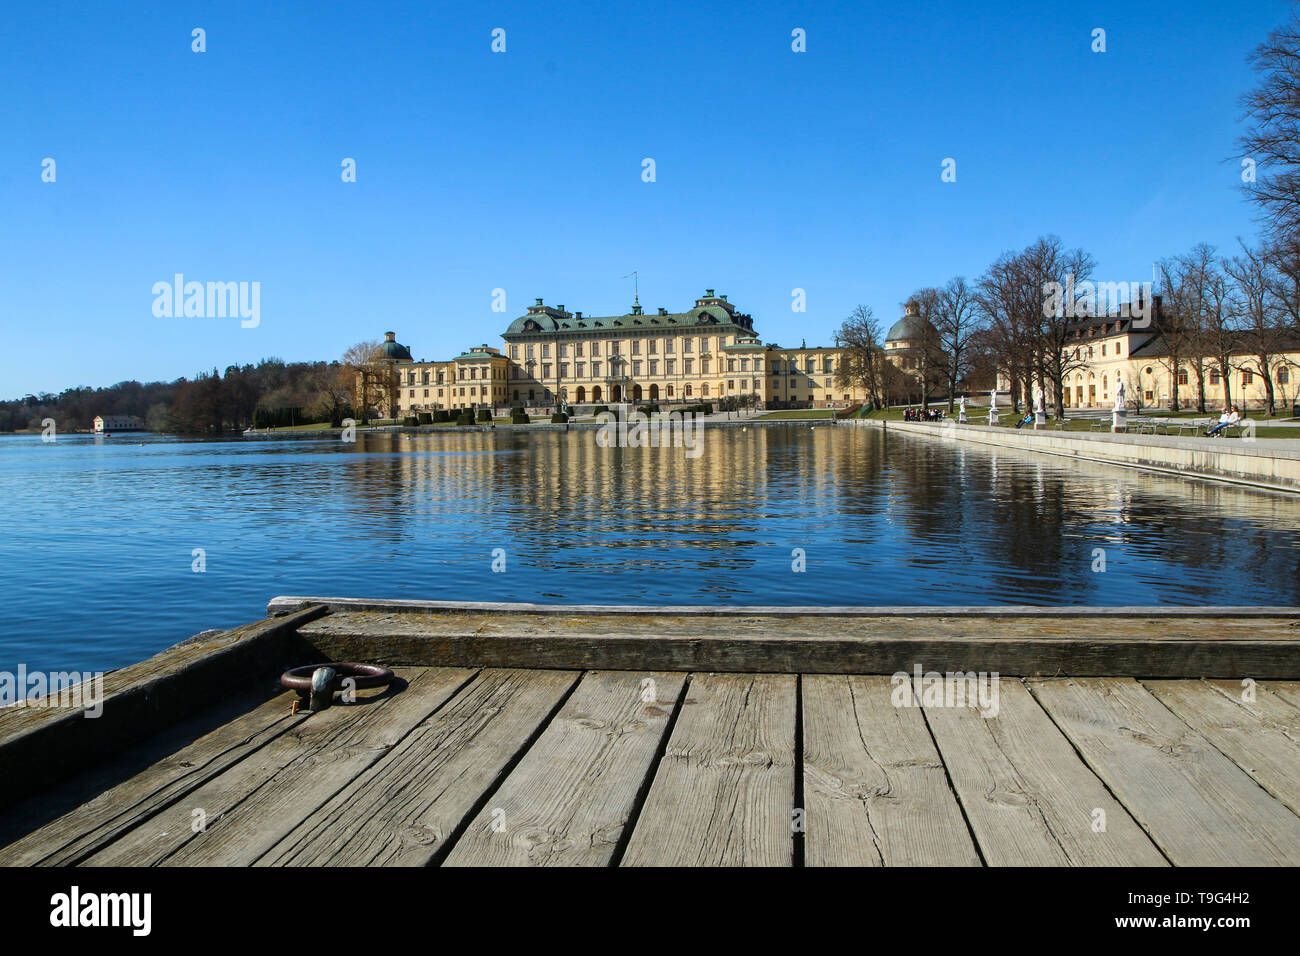 The royal palace Drotingholm in Stockholm in Sweden. The famous tourist attraction which everyone wants to visit. Stock Photo